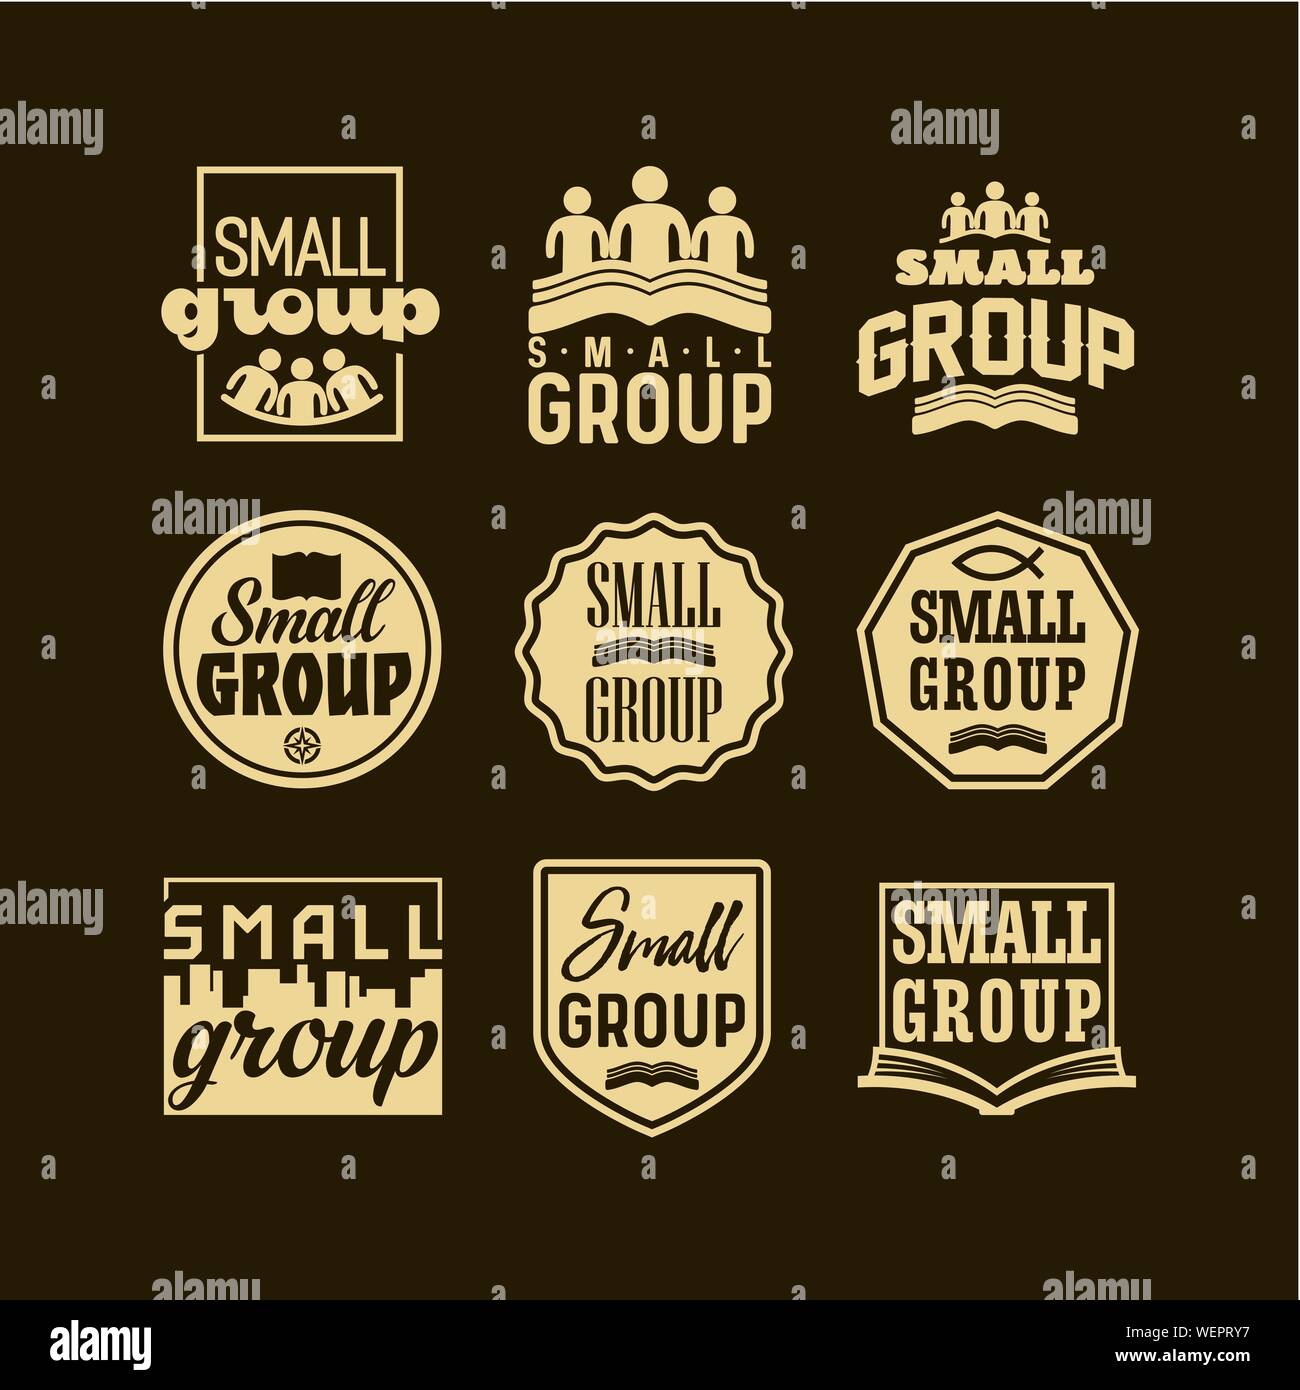 Christian logos, banners and stickers. Small group. Stock Vector